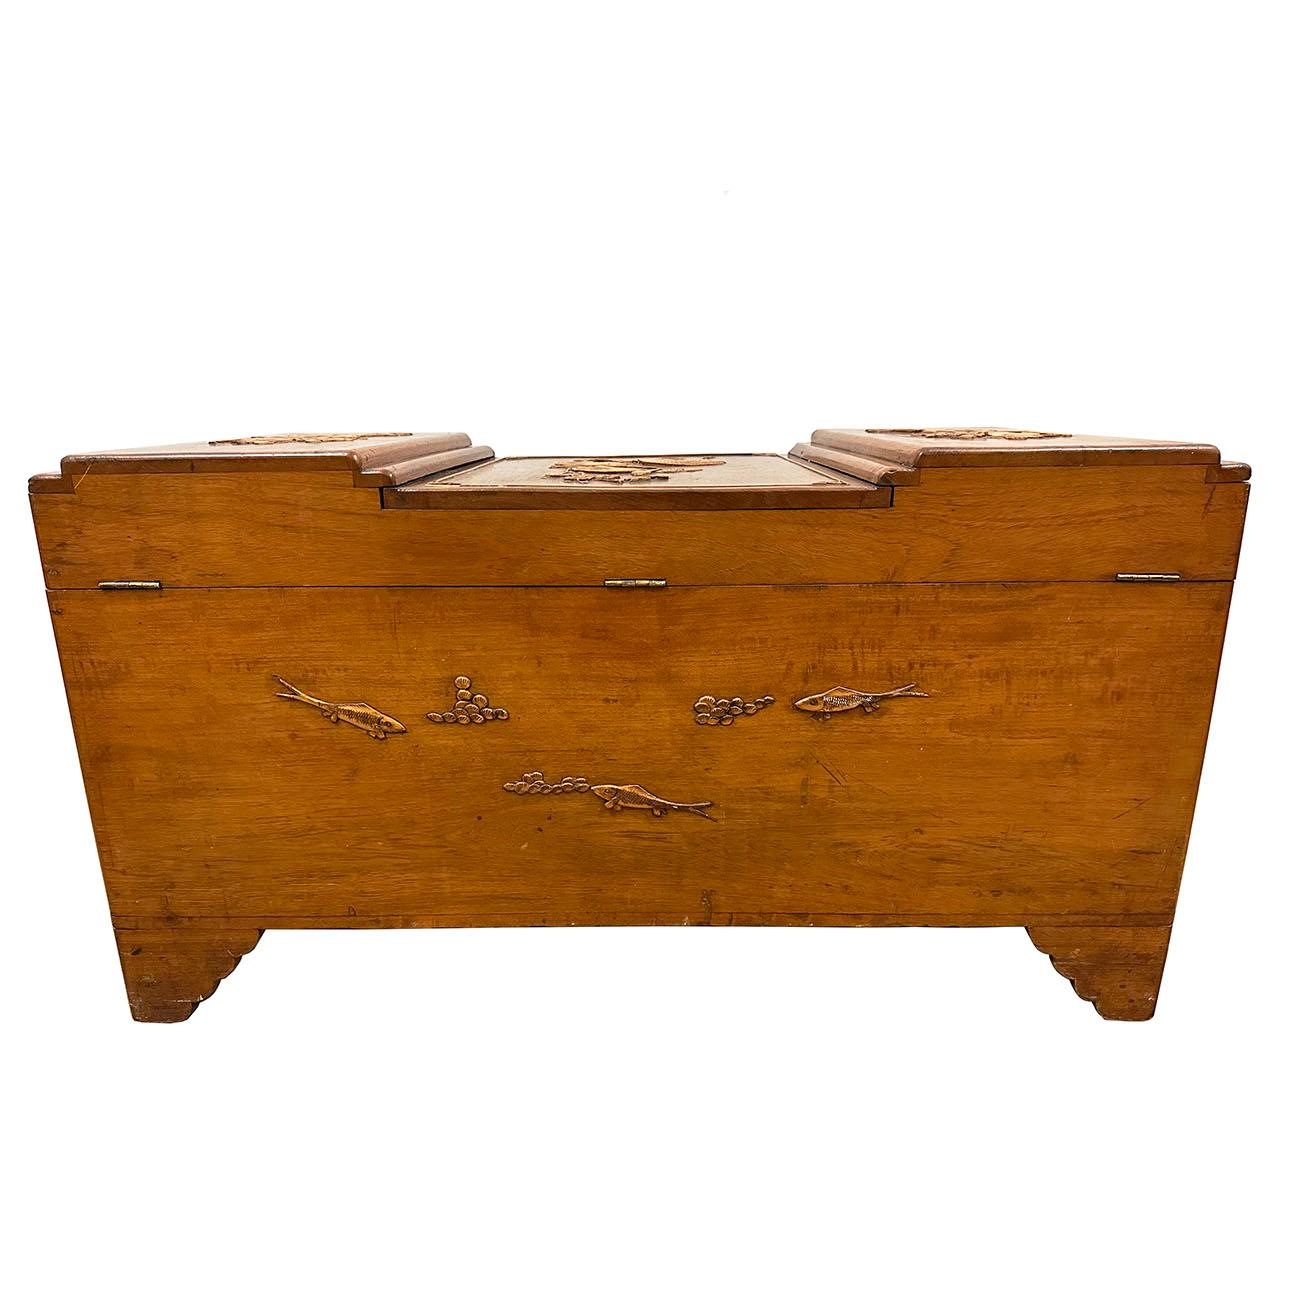 Early 20th Century Chinese Carved Camphor wood Hope Chest For Sale 4